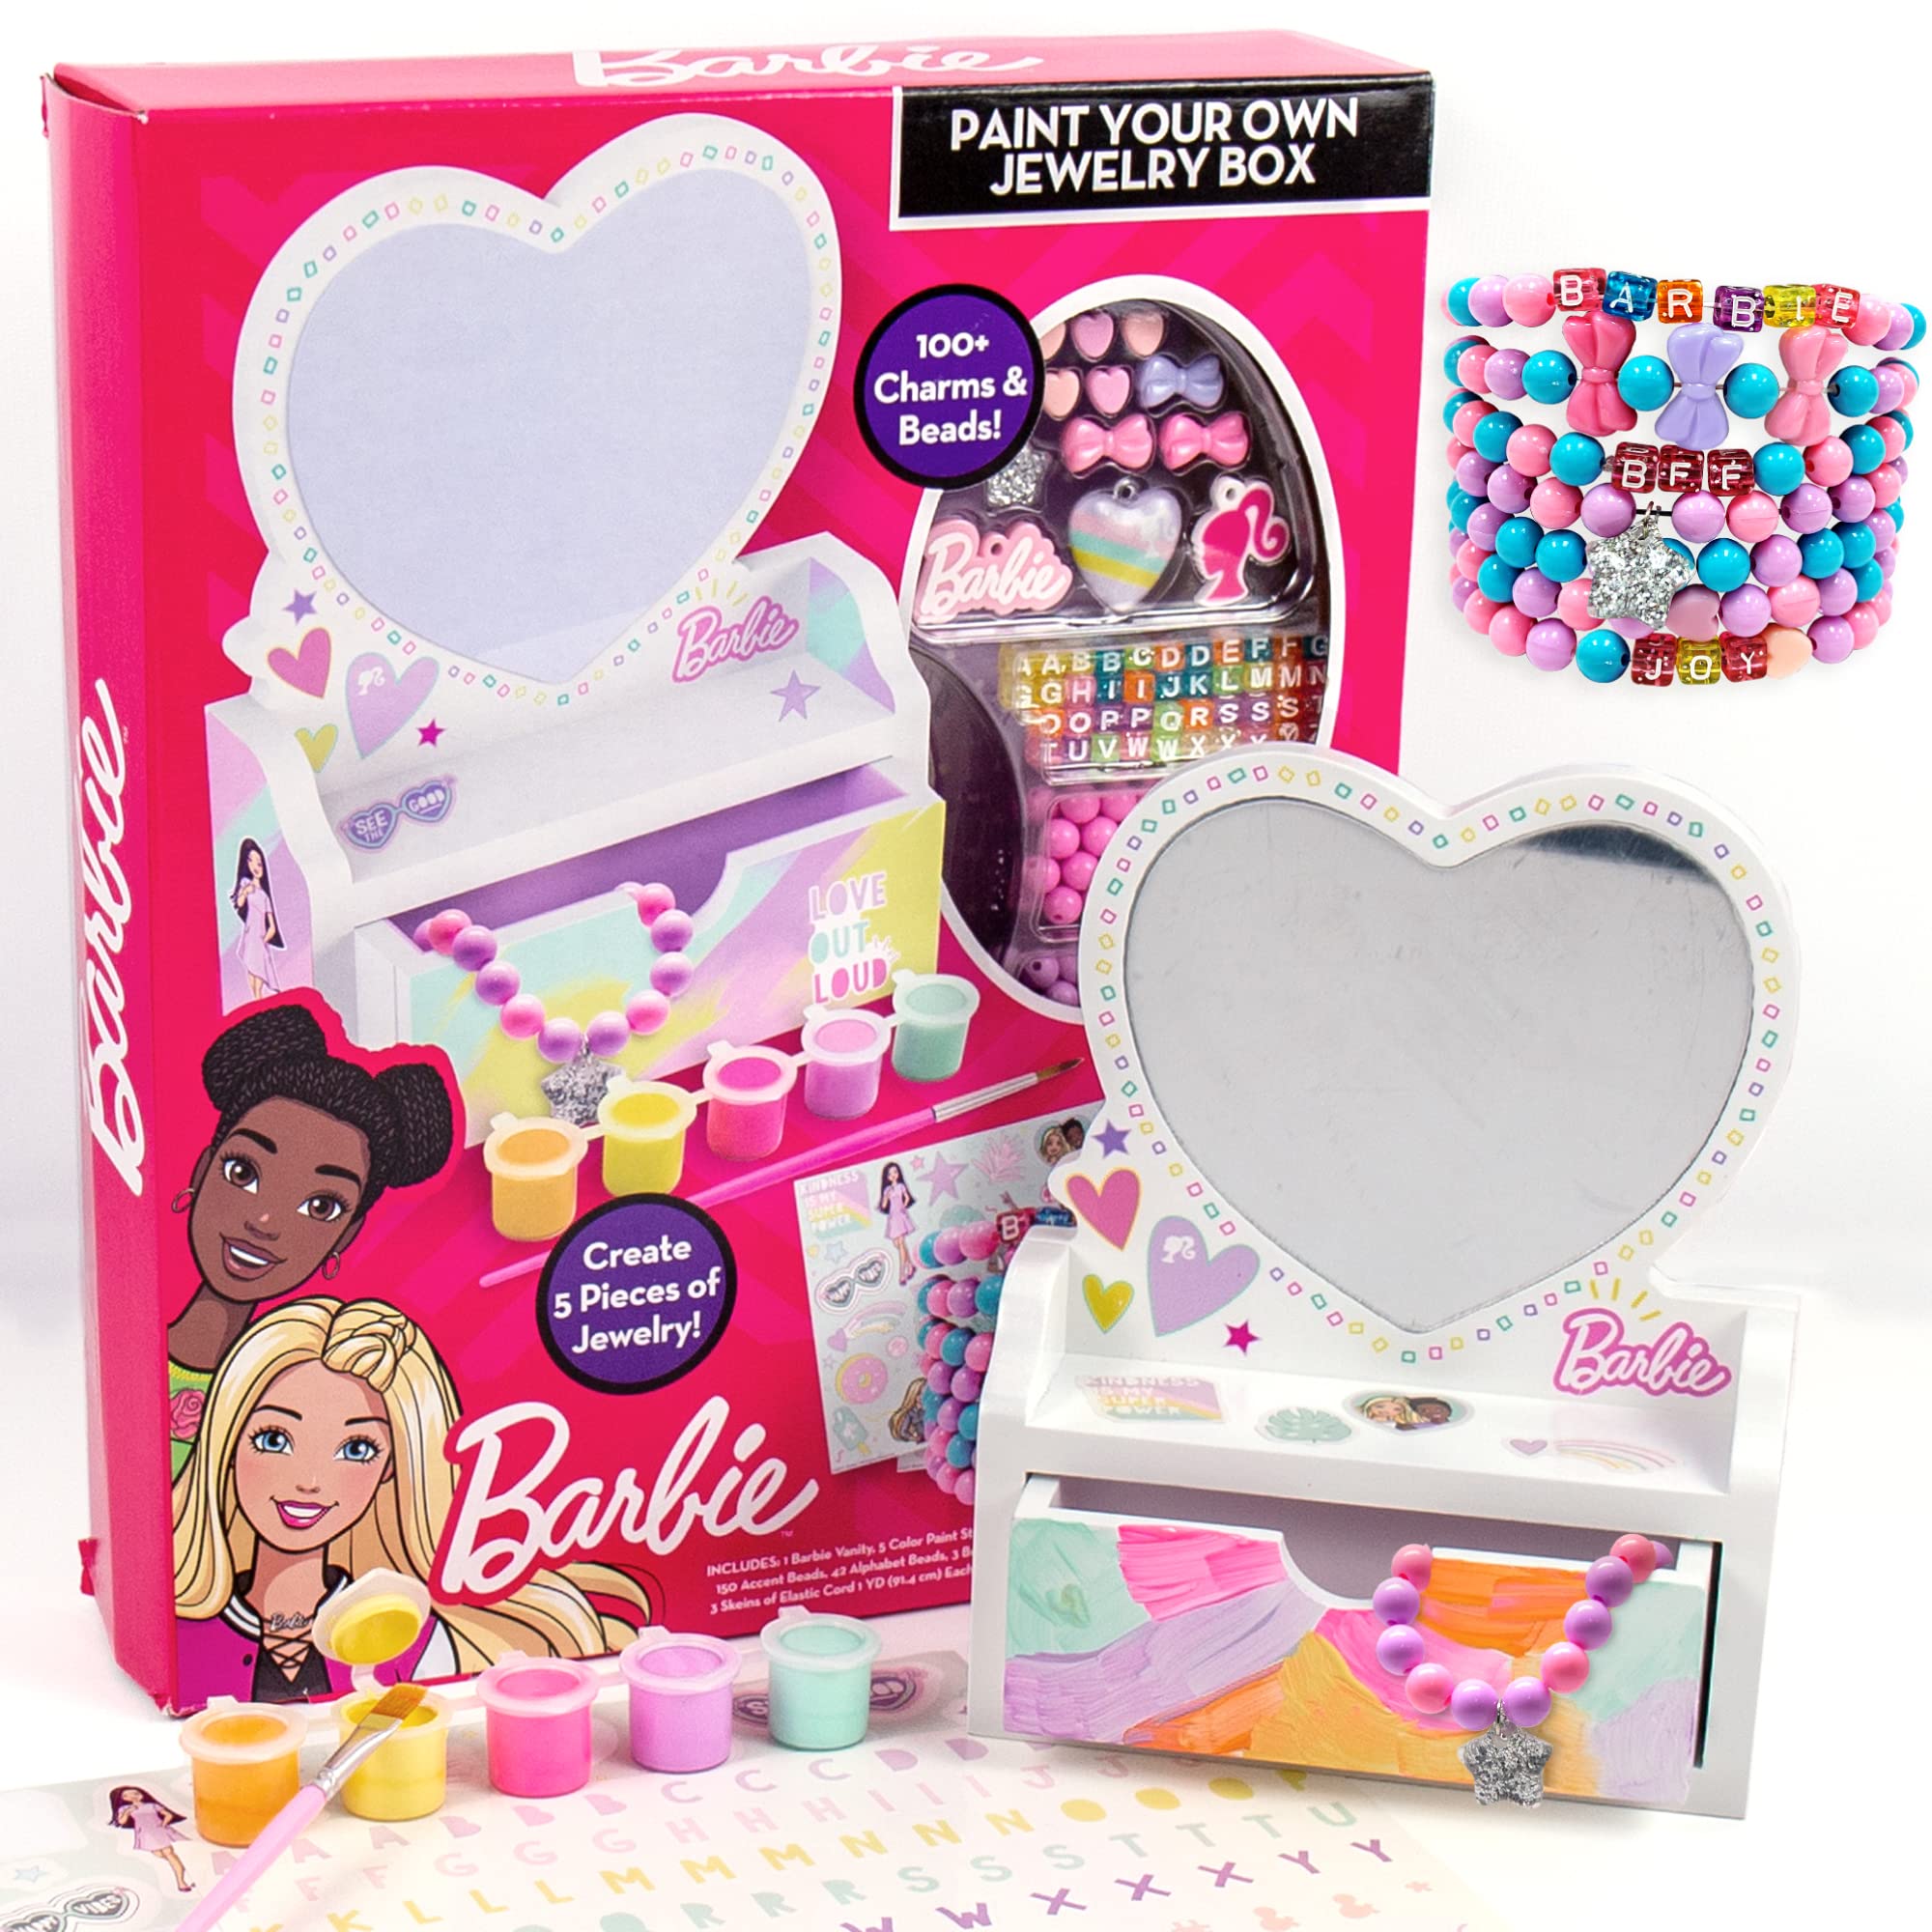 Barbie Paint Your Own Jewelry Box, Customize A Heart-Shaped Vanity & Jewelry Box with Acrylic Paints, Create 5 Pieces of Jewelry, 100+ Charms & Beads, Bead Kit for Kids Ages 5, 6, 7, 8